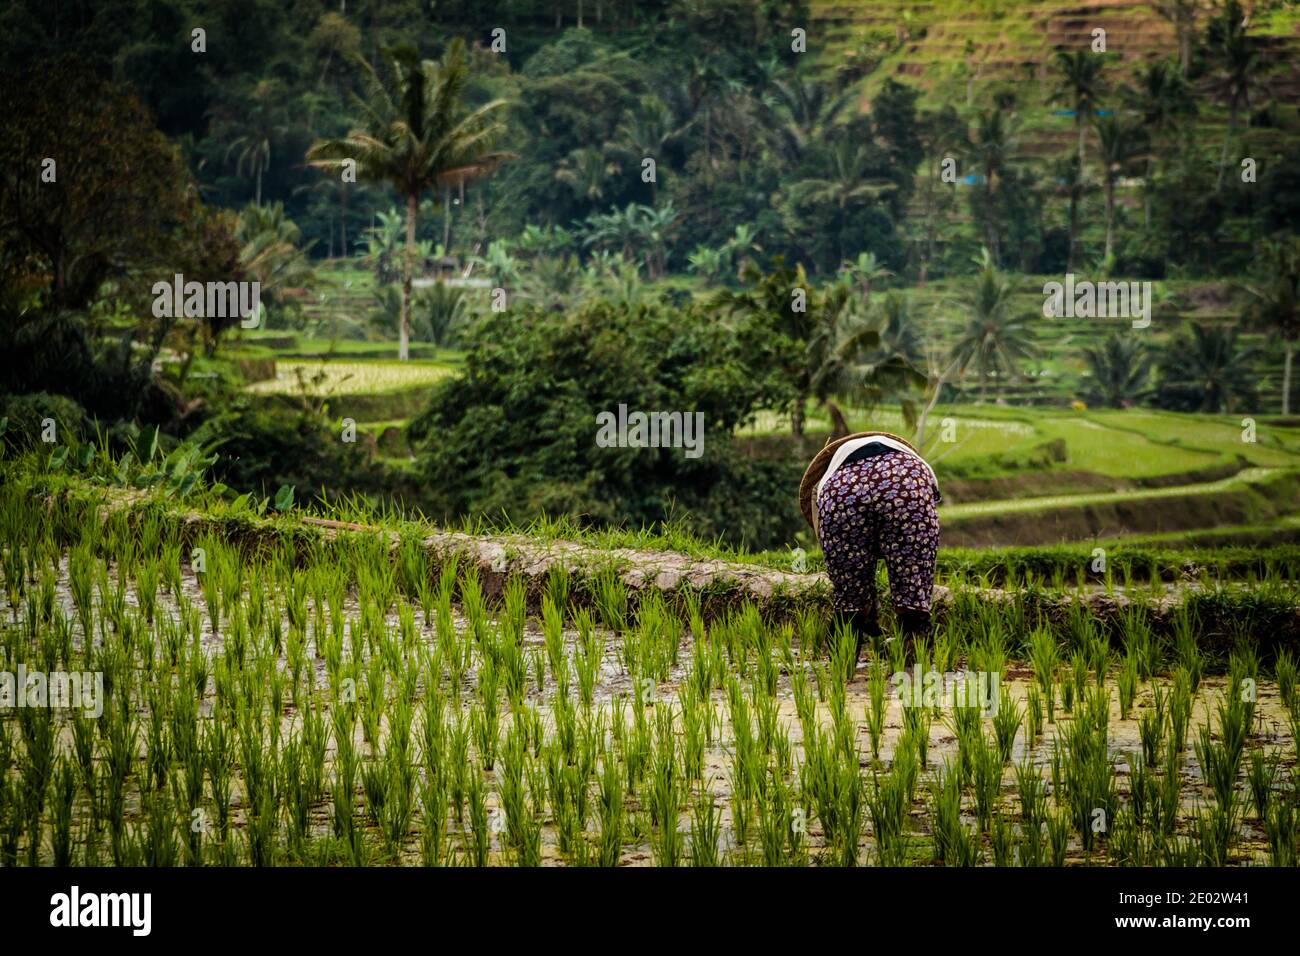 Rice worker in traditional clothes bent down while working in the rice paddy at Jatiluwih Rice Terrace Stock Photo